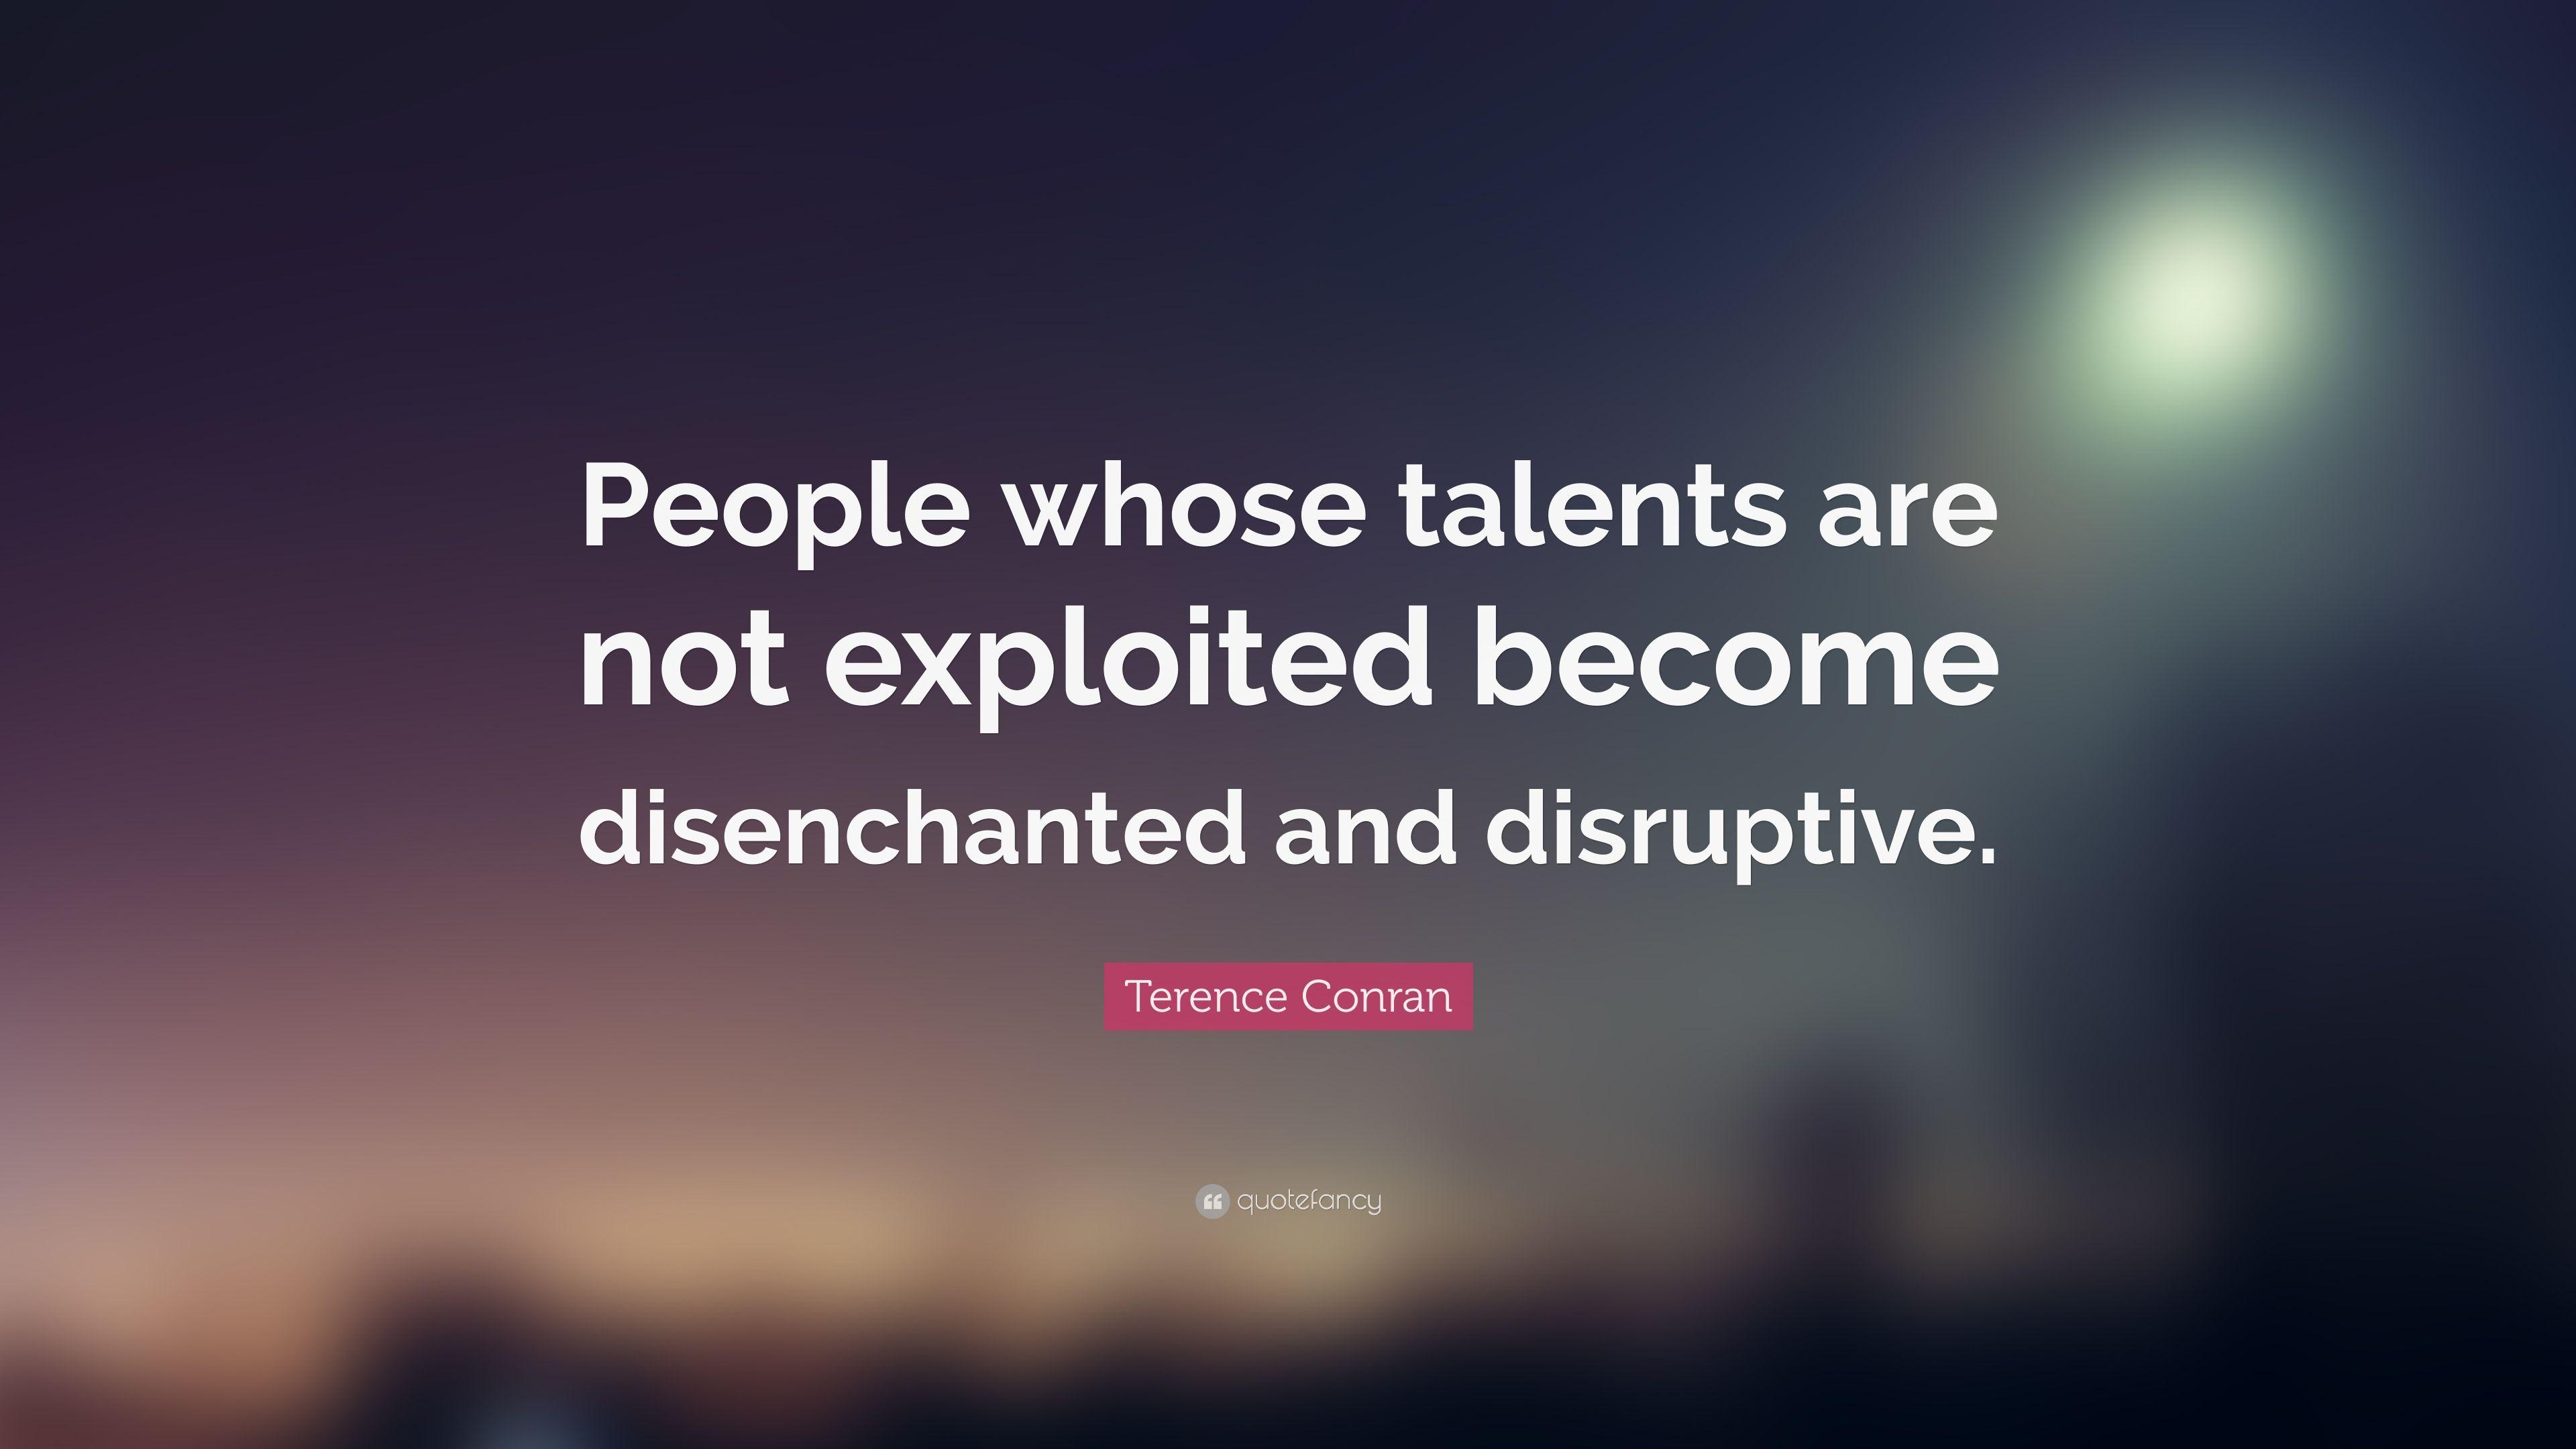 Terence Conran Quote: “People whose talents are not exploited become